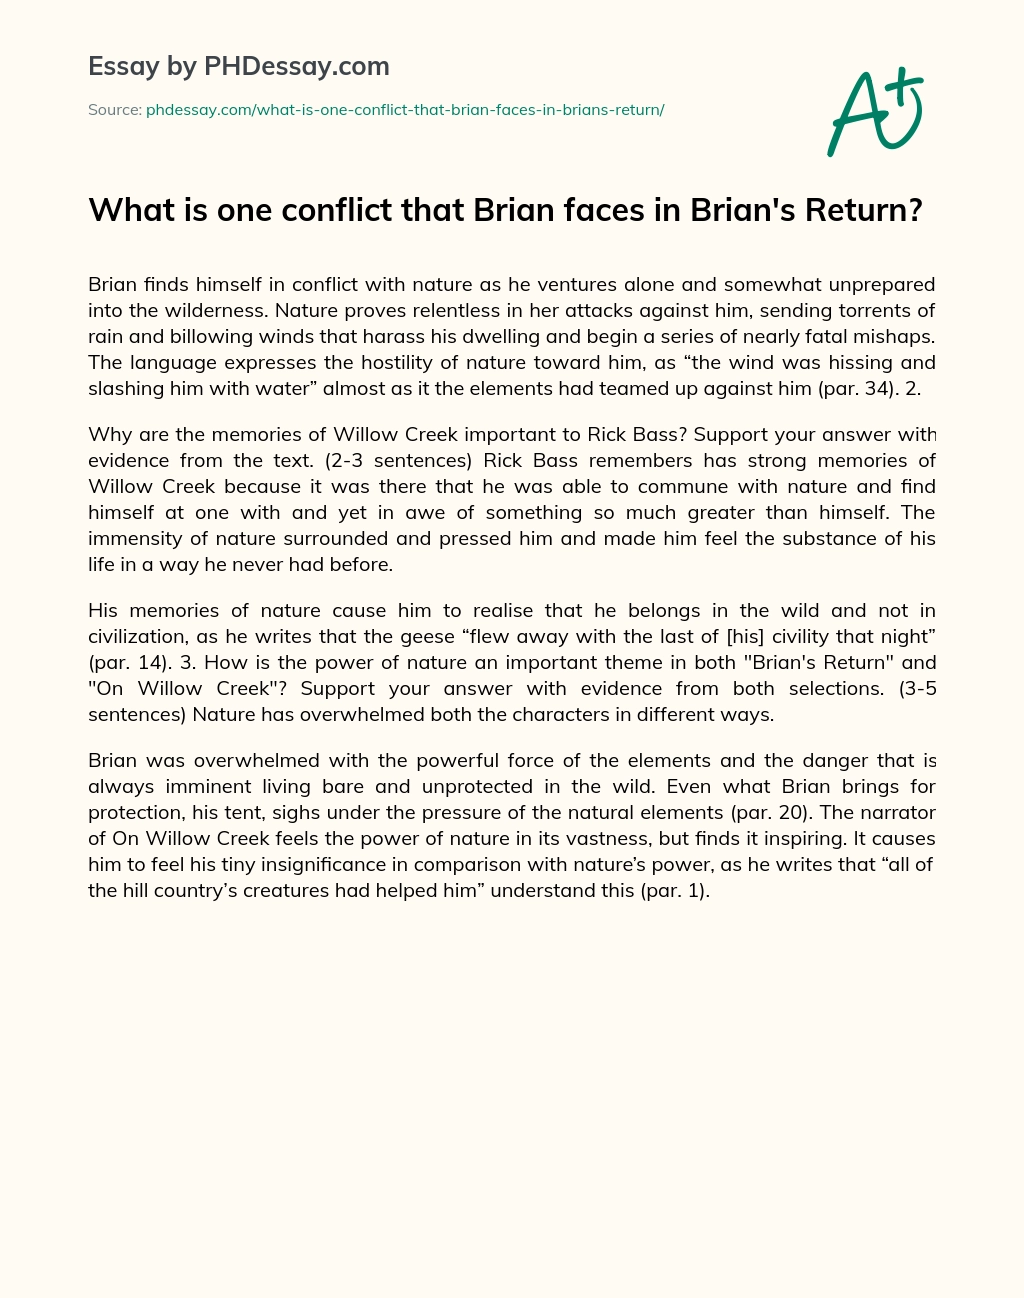 What is one conflict that Brian faces in Brian’s Return? essay